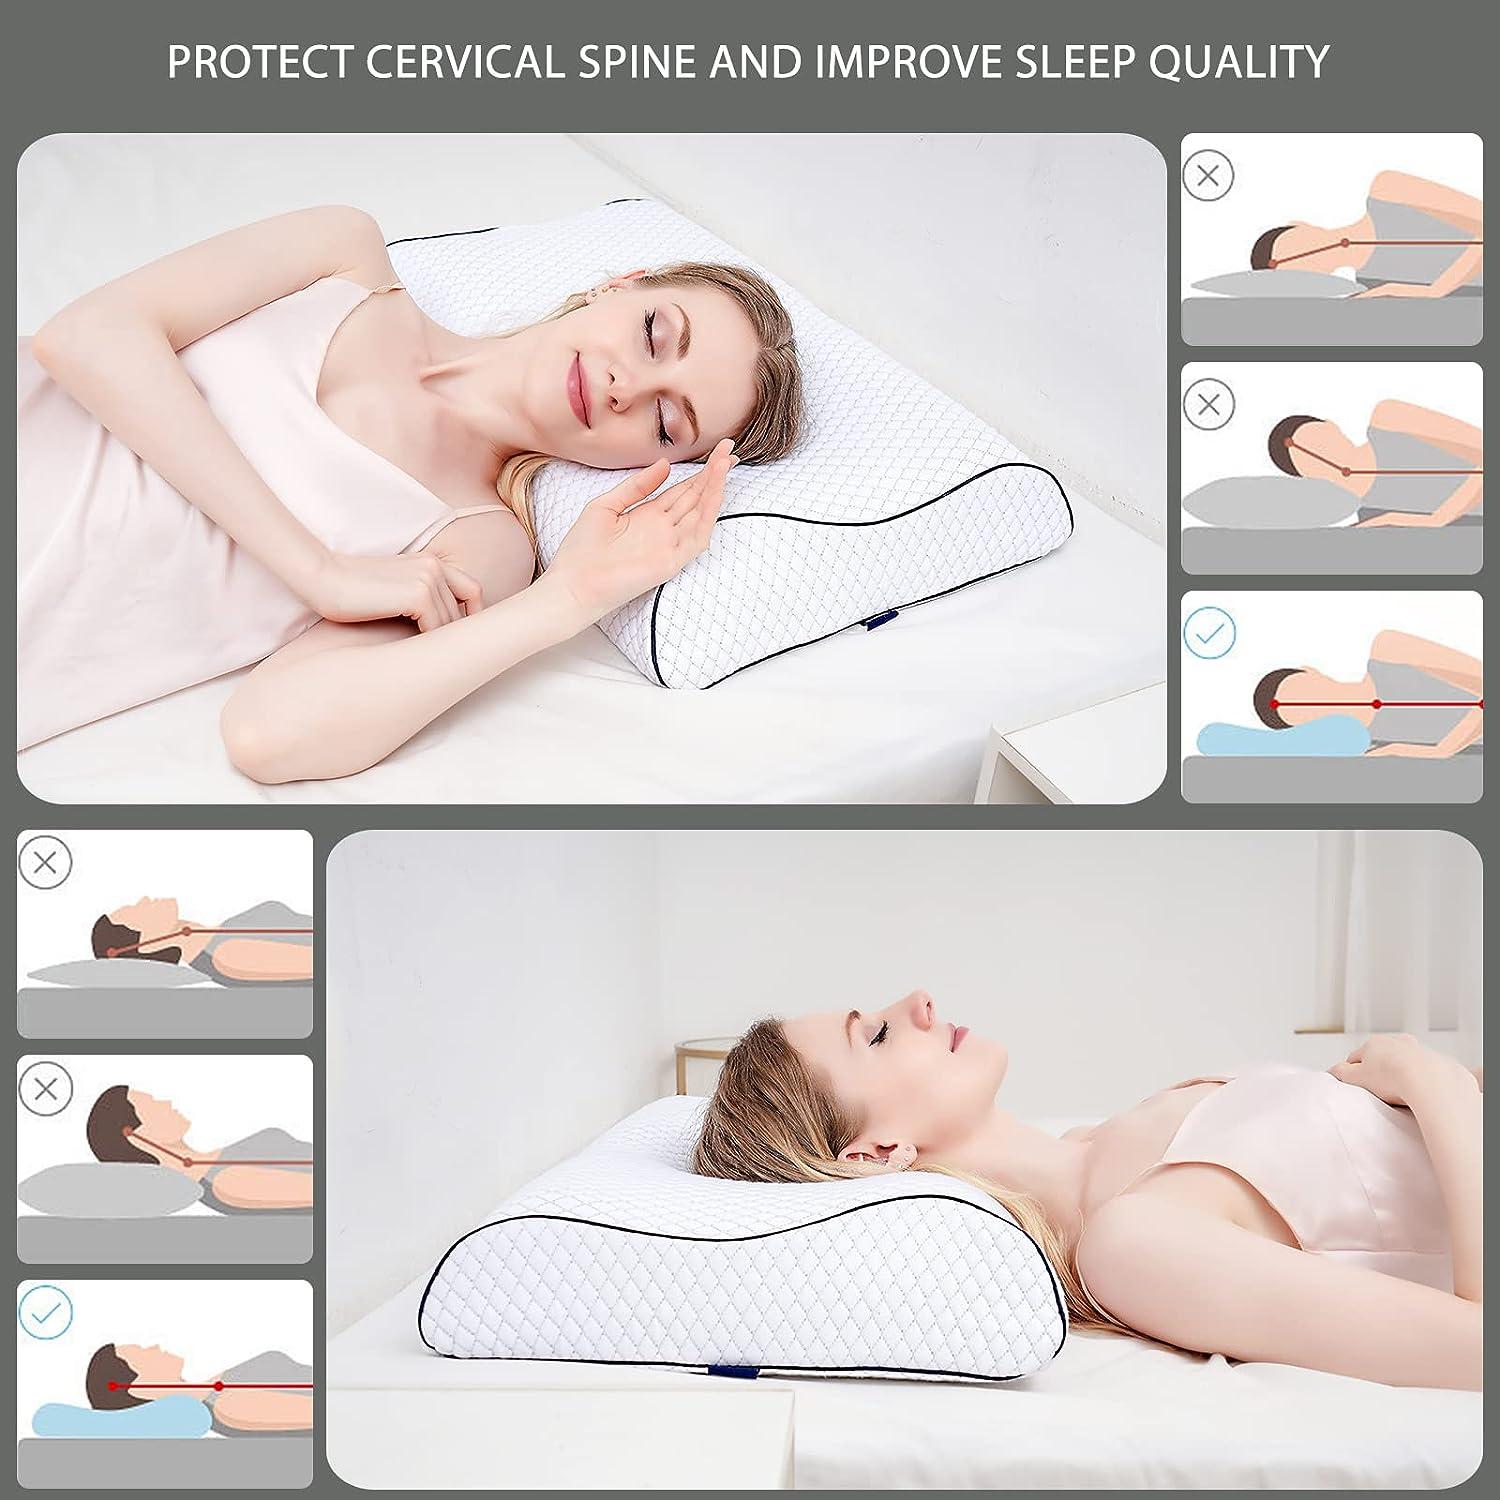 Sleeping with a Cervical Pillow for Neck Pain - The Brain & Spine